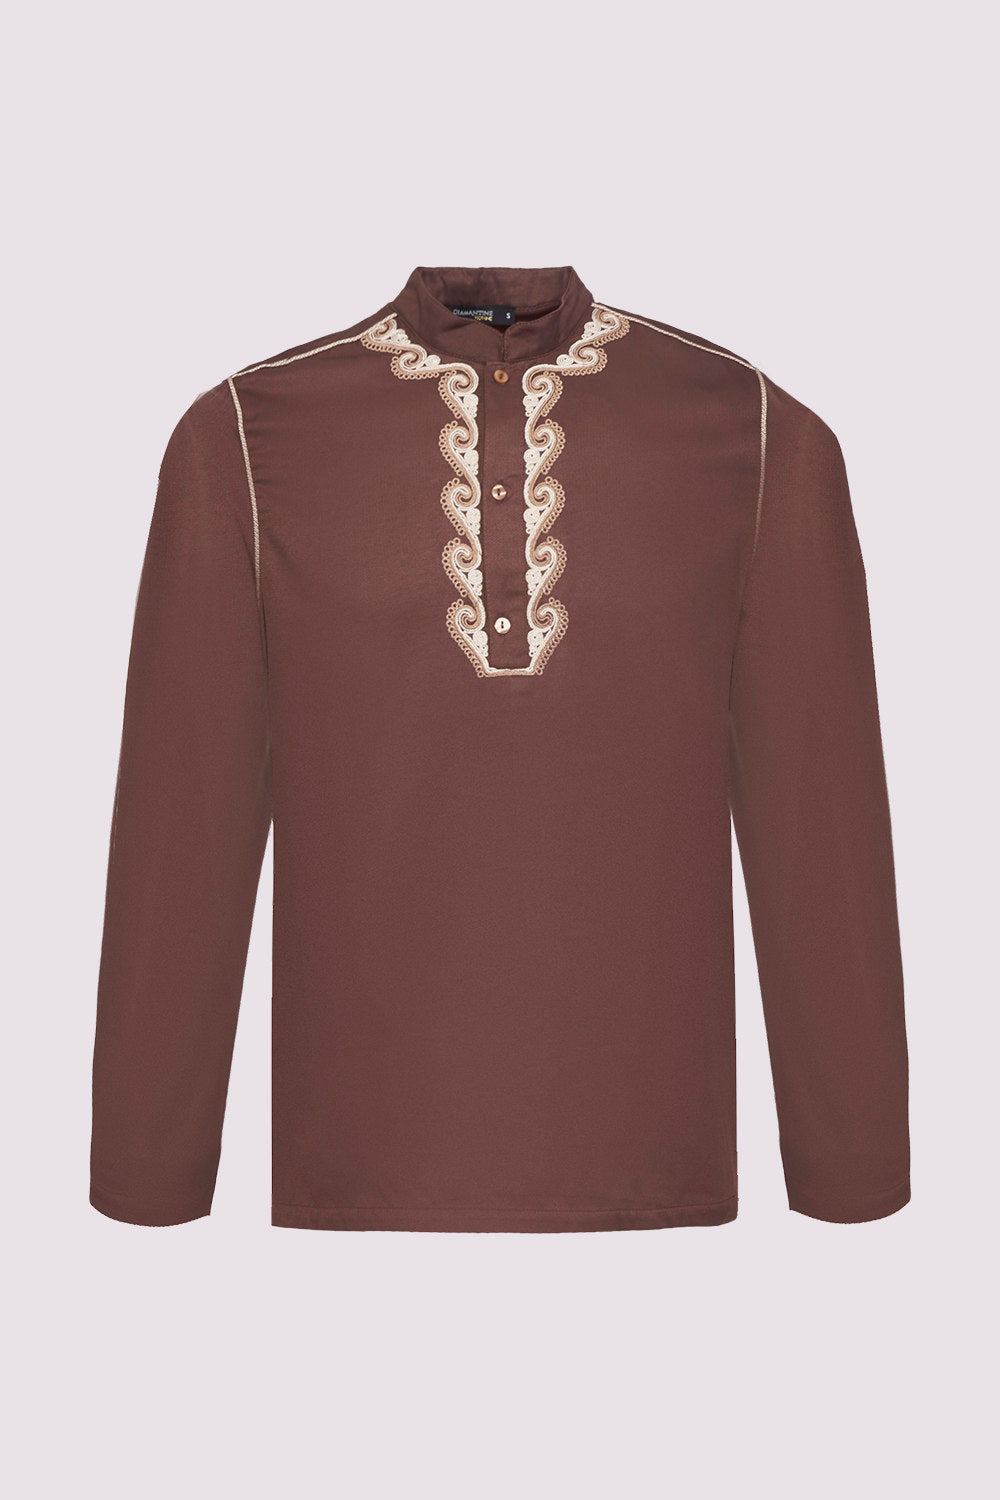 Radi Men's Long Sleeve Button-Up Embroidered Top with Stand Up Collar in Brown